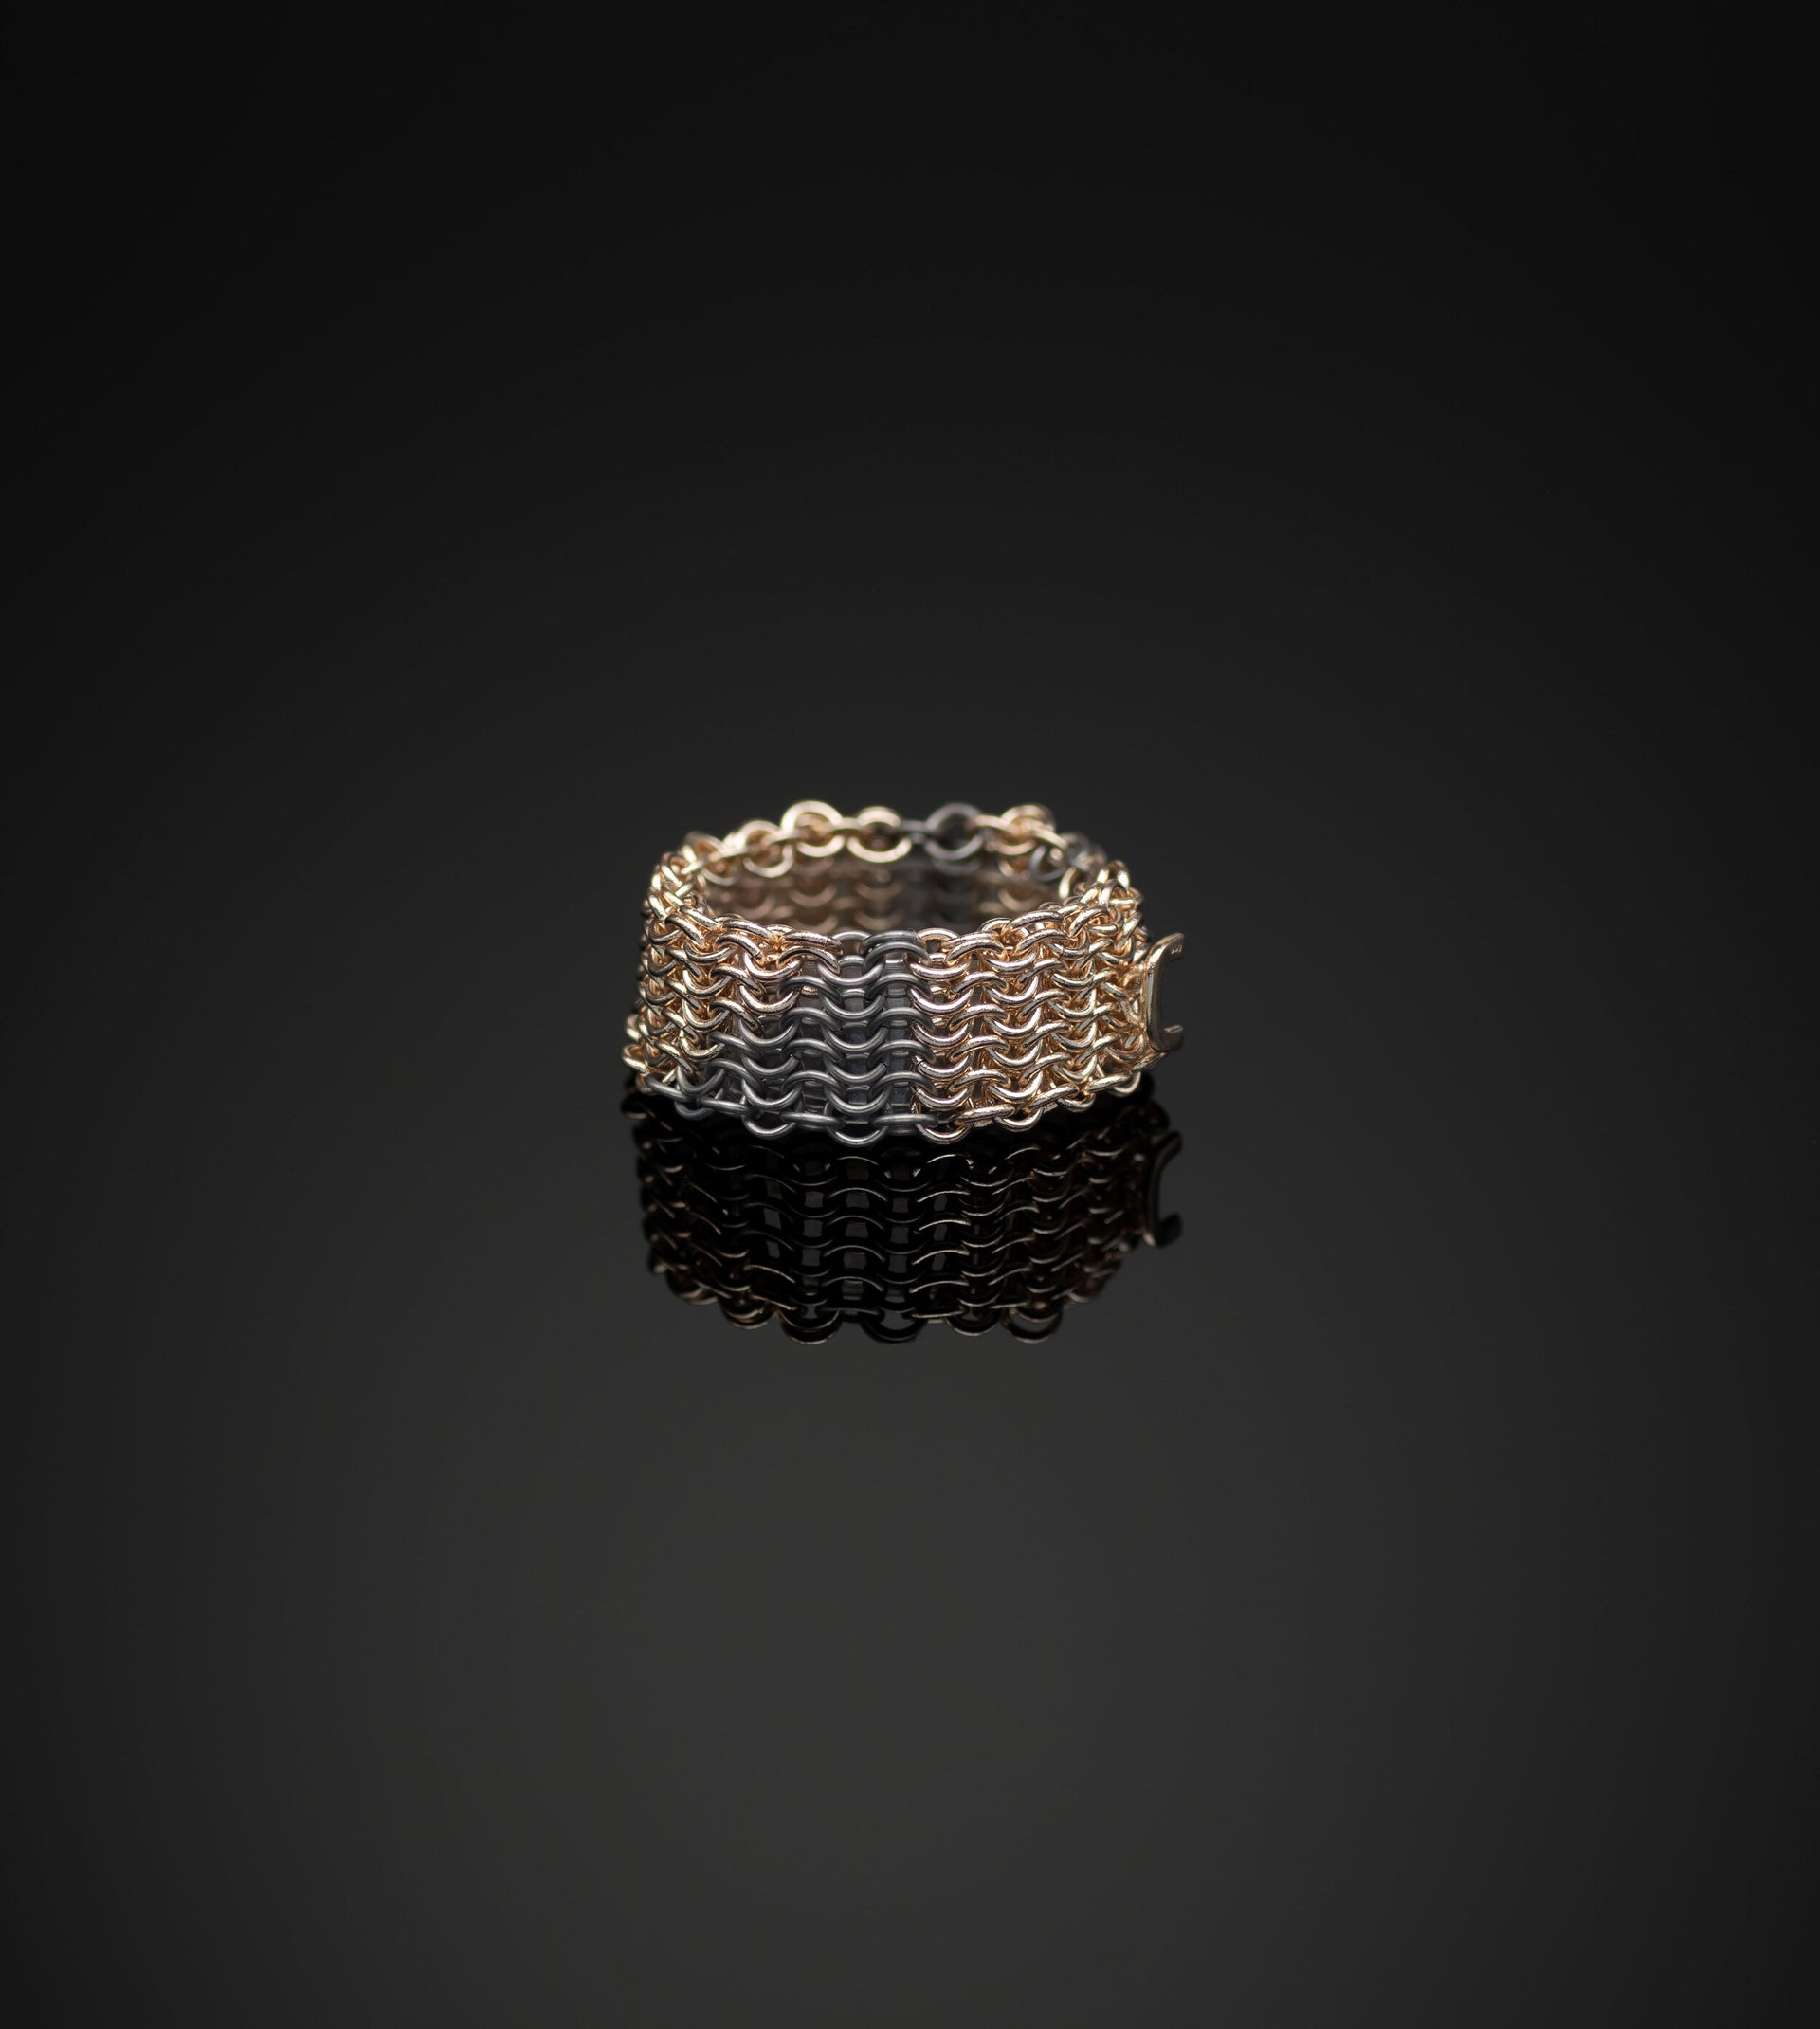 'U' recycled 18ct yellow gold and titanium ring handcrafted contemporary chainmail jewellery chain ring by Corrinne Eira Evans